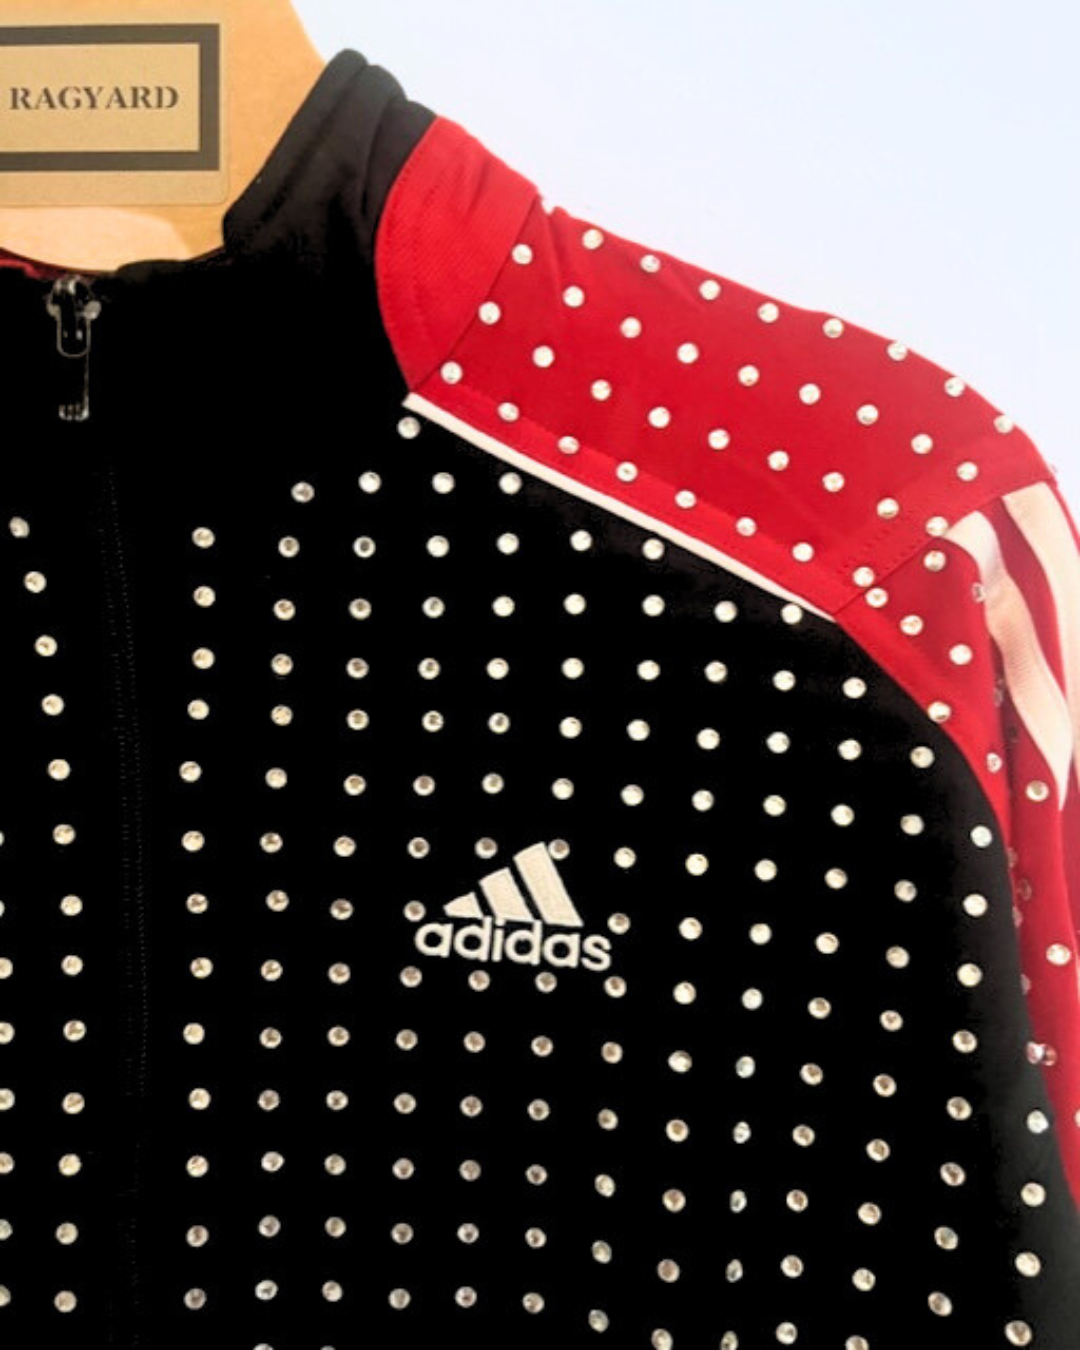 Vintage Red & Black ADIDAS Track-top with all over diamante studs